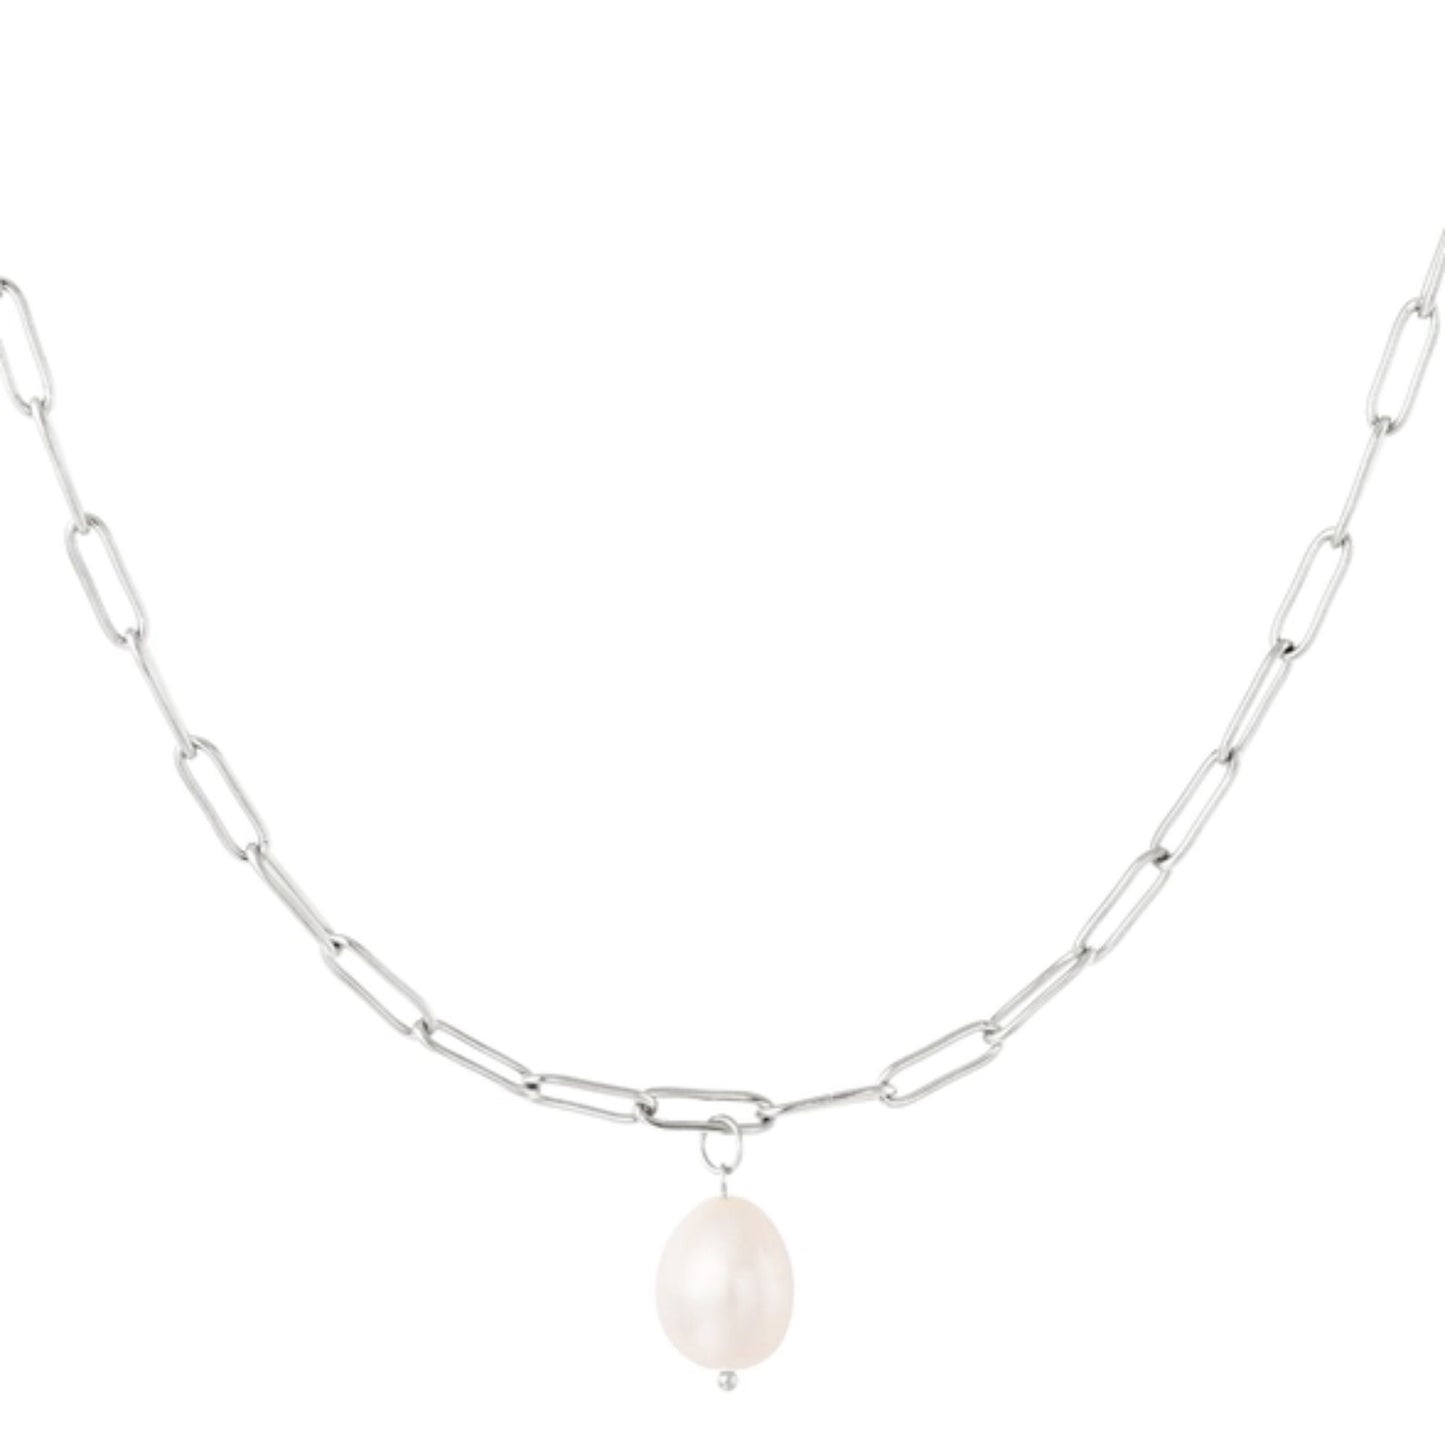 Silver Chain with Freshwater Pearl